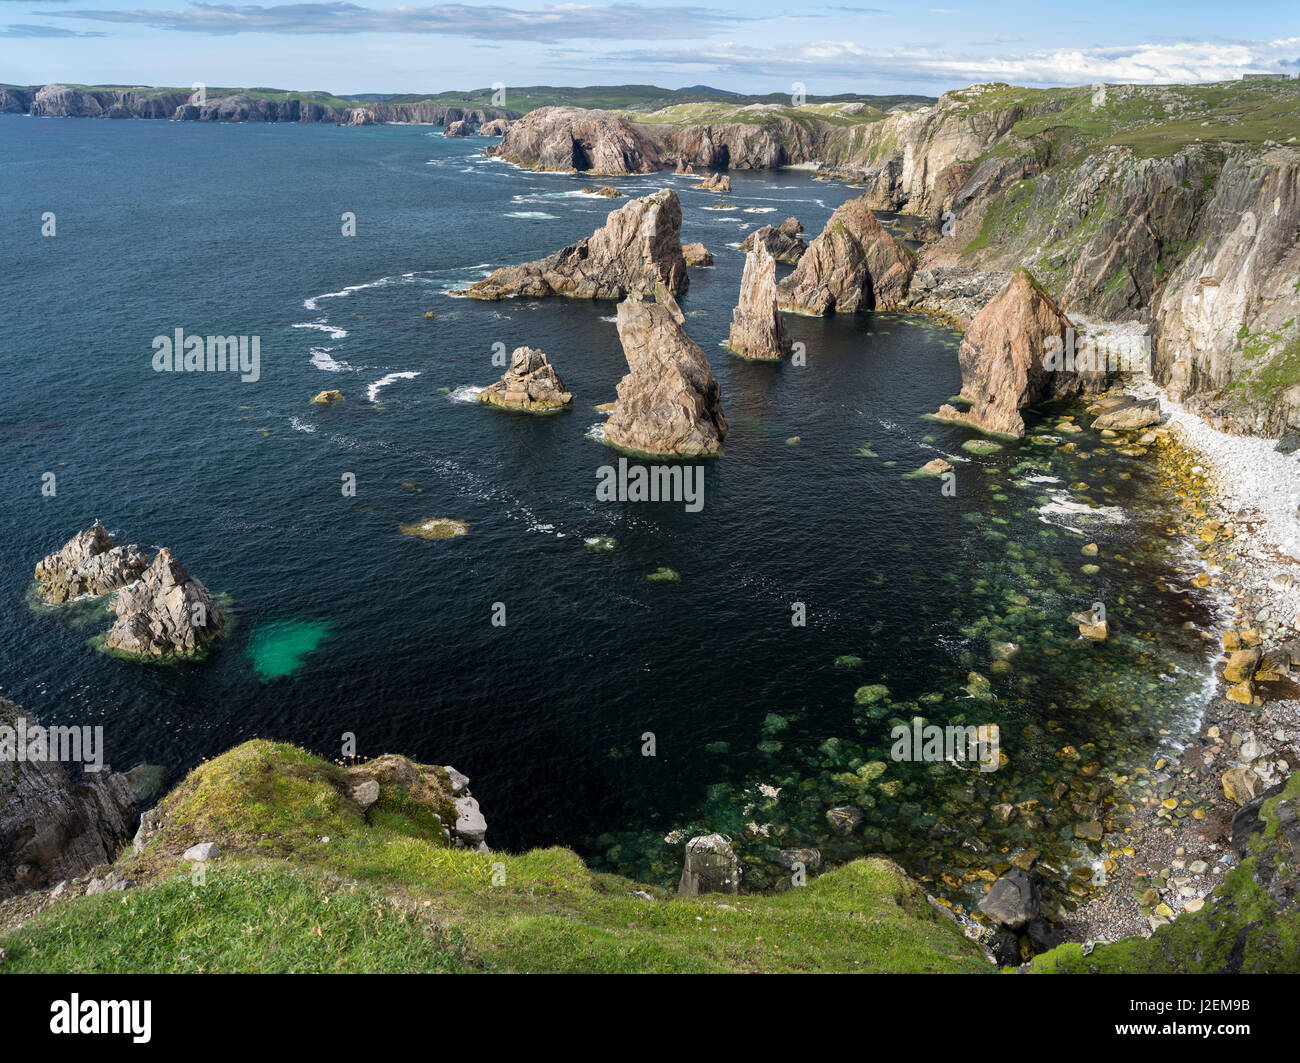 Isle of Lewis, The cliffs and sea stacks near Mangersta (Mangurstadh) in Uig. Scotland in July (Large format sizes available) Stock Photo